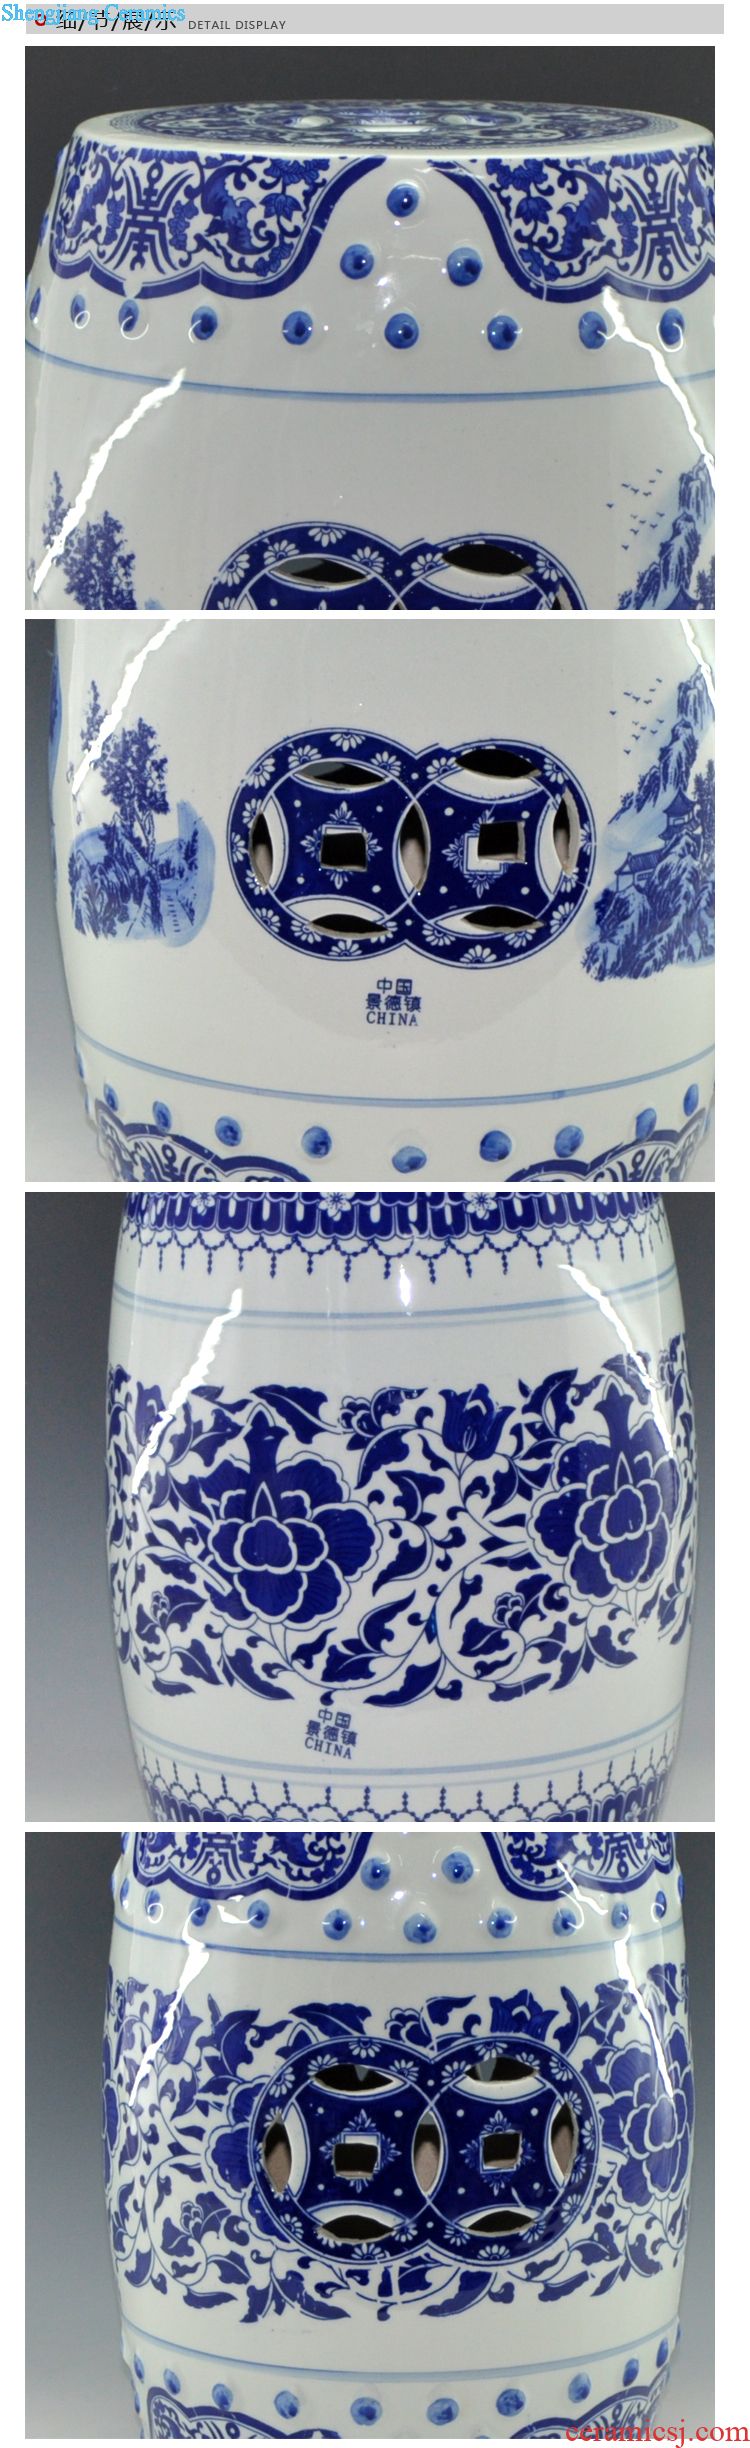 Jingdezhen ceramics master hand brush pot furnishing articles household act the role ofing is tasted creative desk of Chinese style arts and crafts